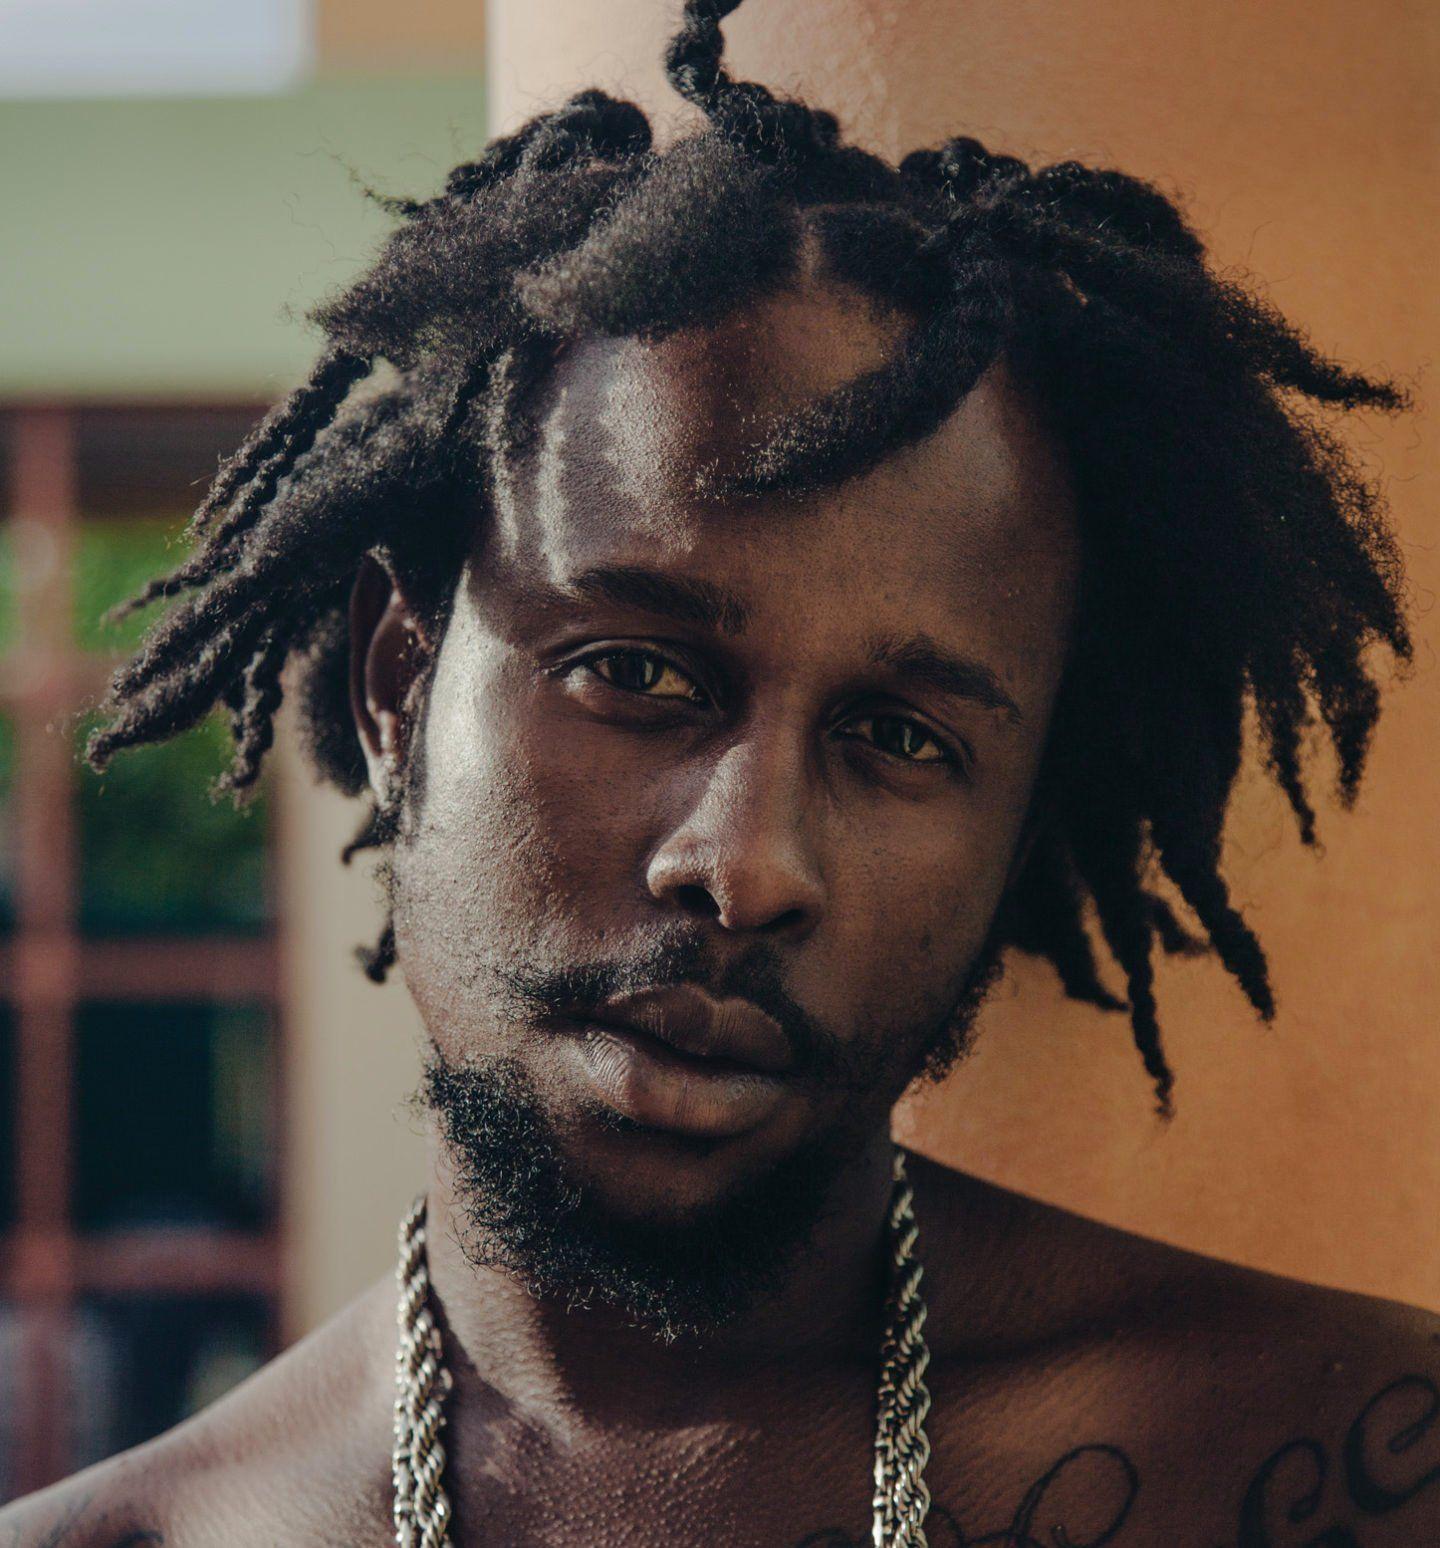 The 33-year old son of father (?) and mother Miss Rhona Popcaan in 2022 photo. Popcaan earned a  million dollar salary - leaving the net worth at  million in 2022